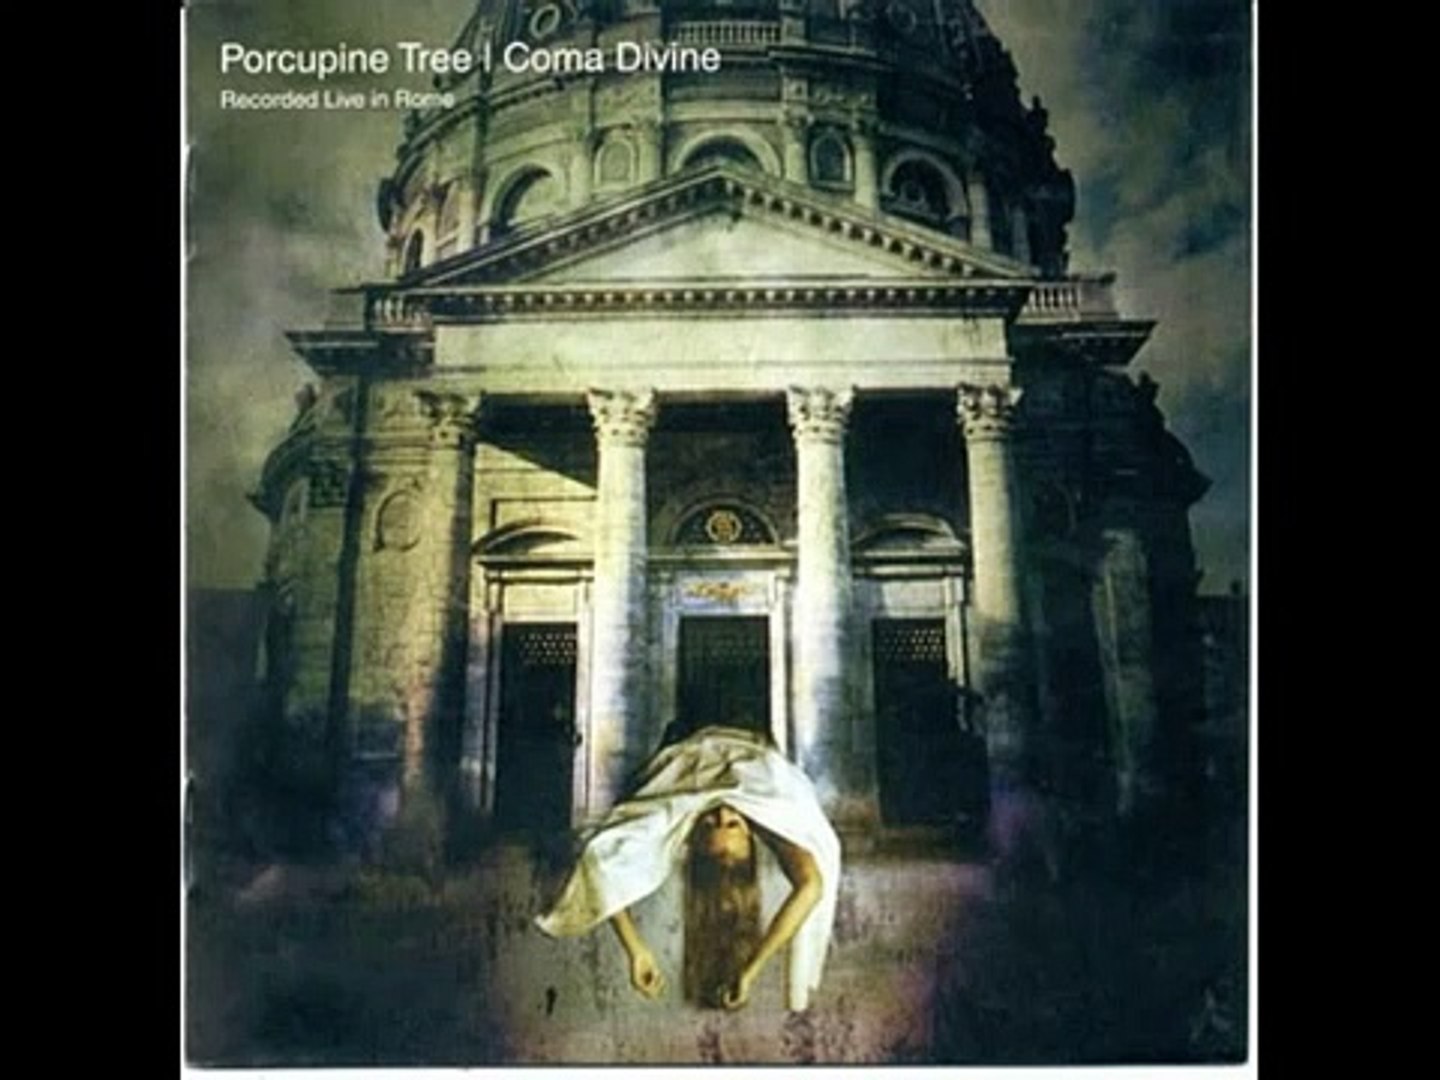 Porcupine tree - Dislocated day.